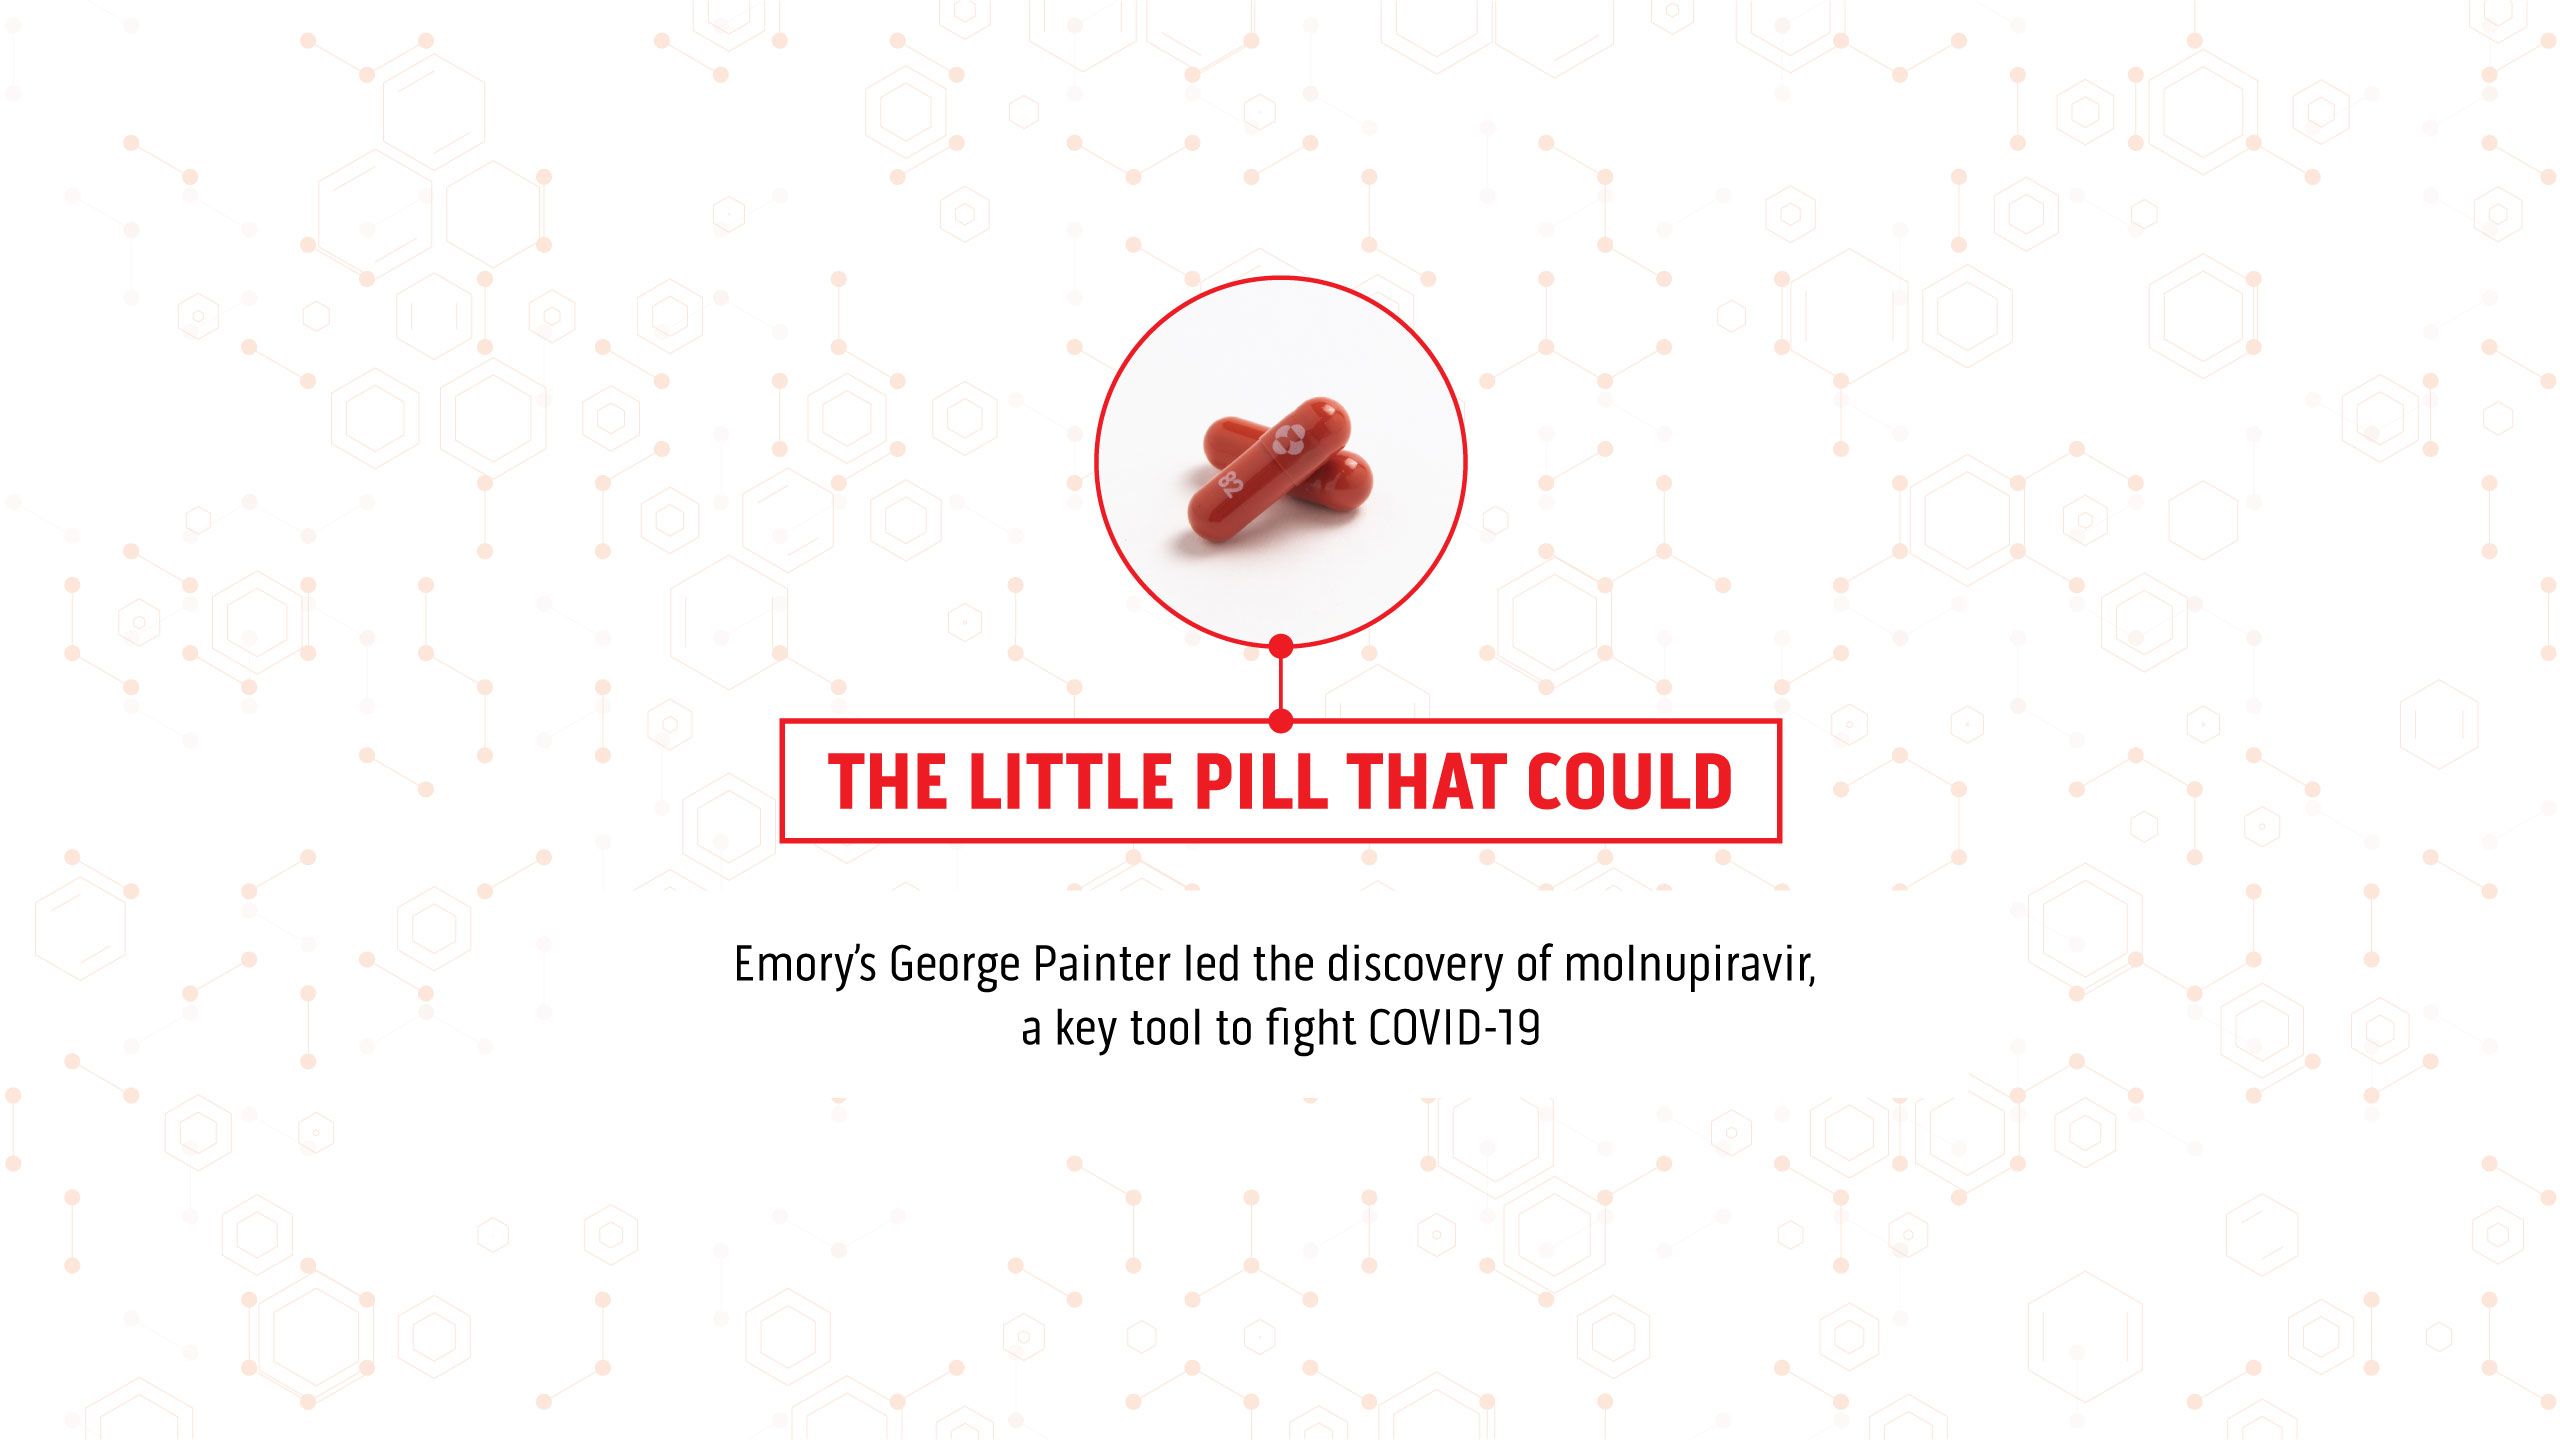 Opening of story on molnupiravir and its development by George Painter; shows the pill and bears the title "The Little Pill That Could."